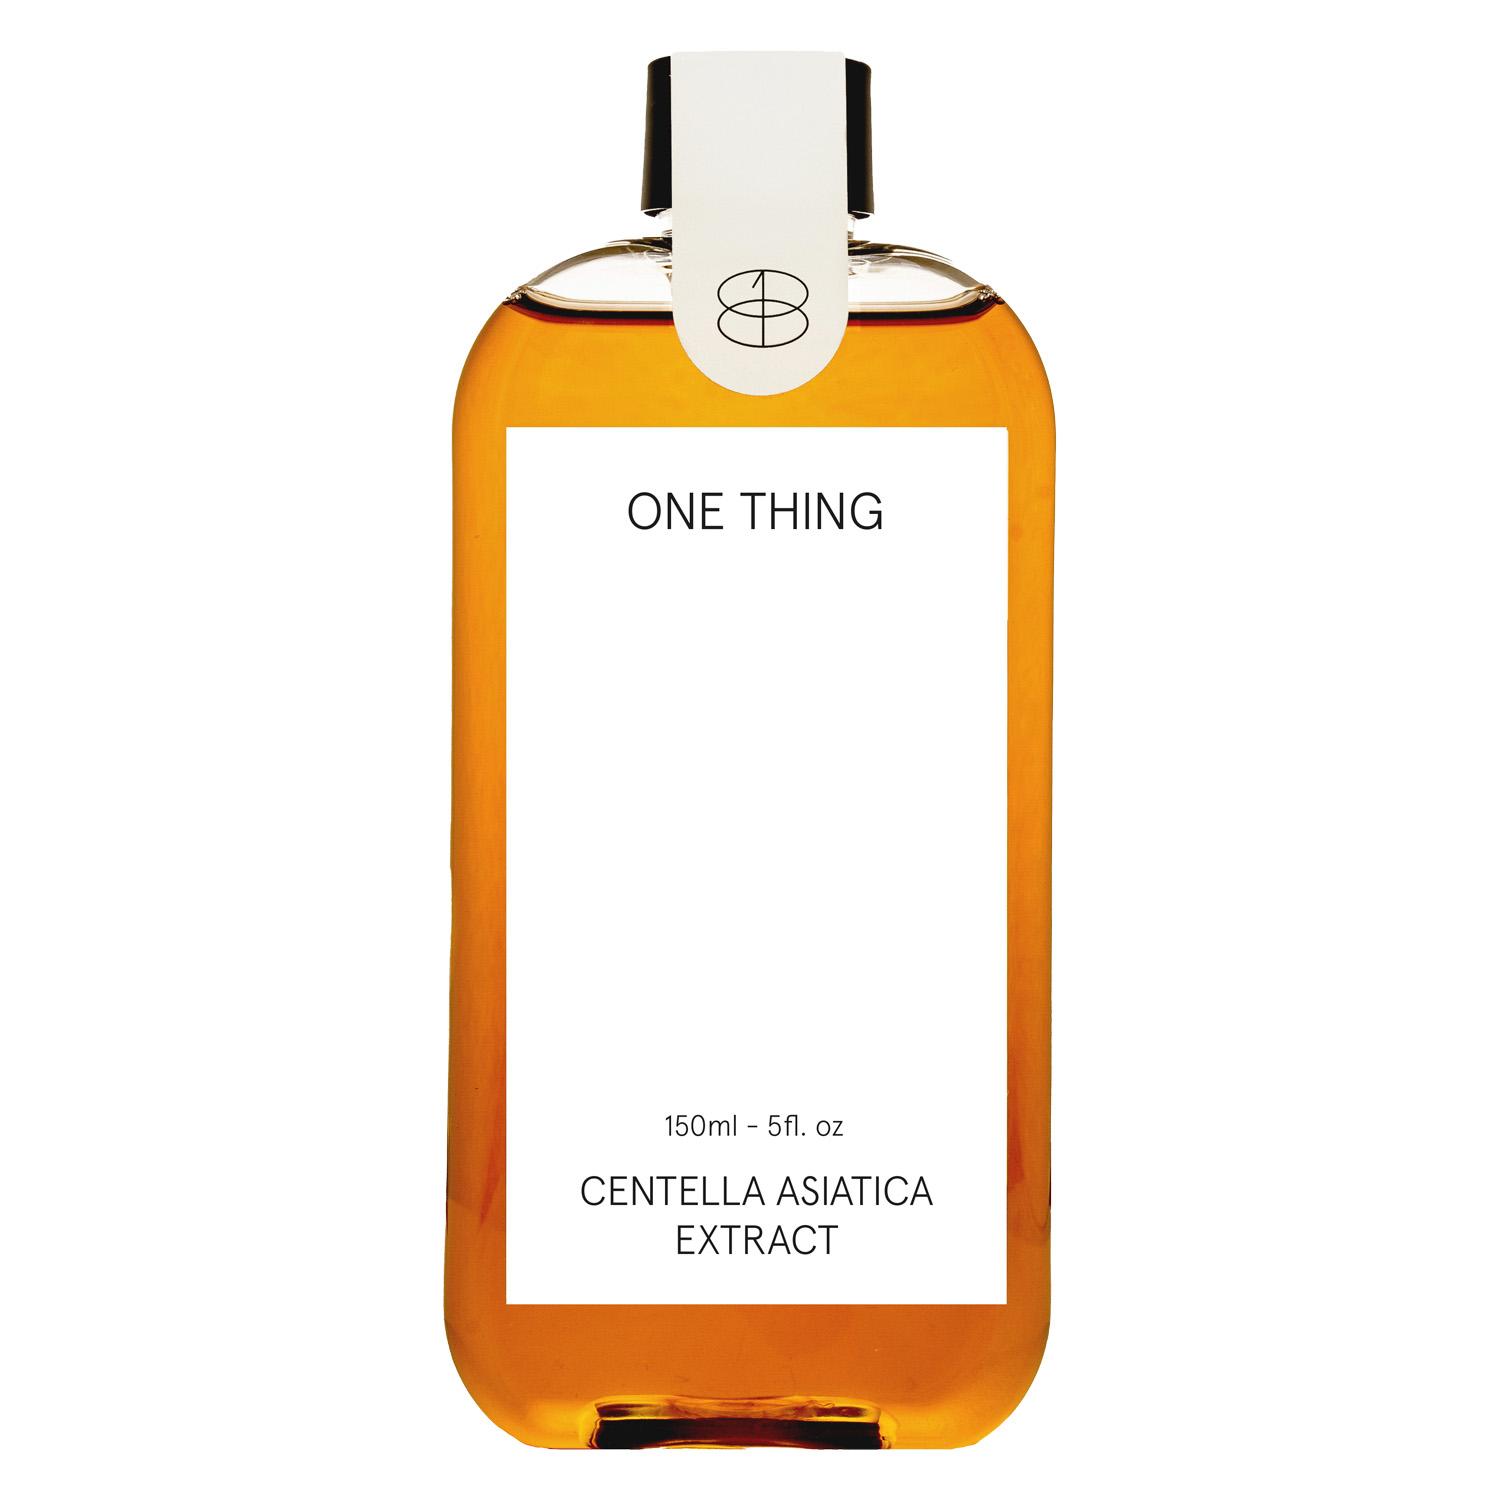 ONE THING - Centella Asiatica Extract